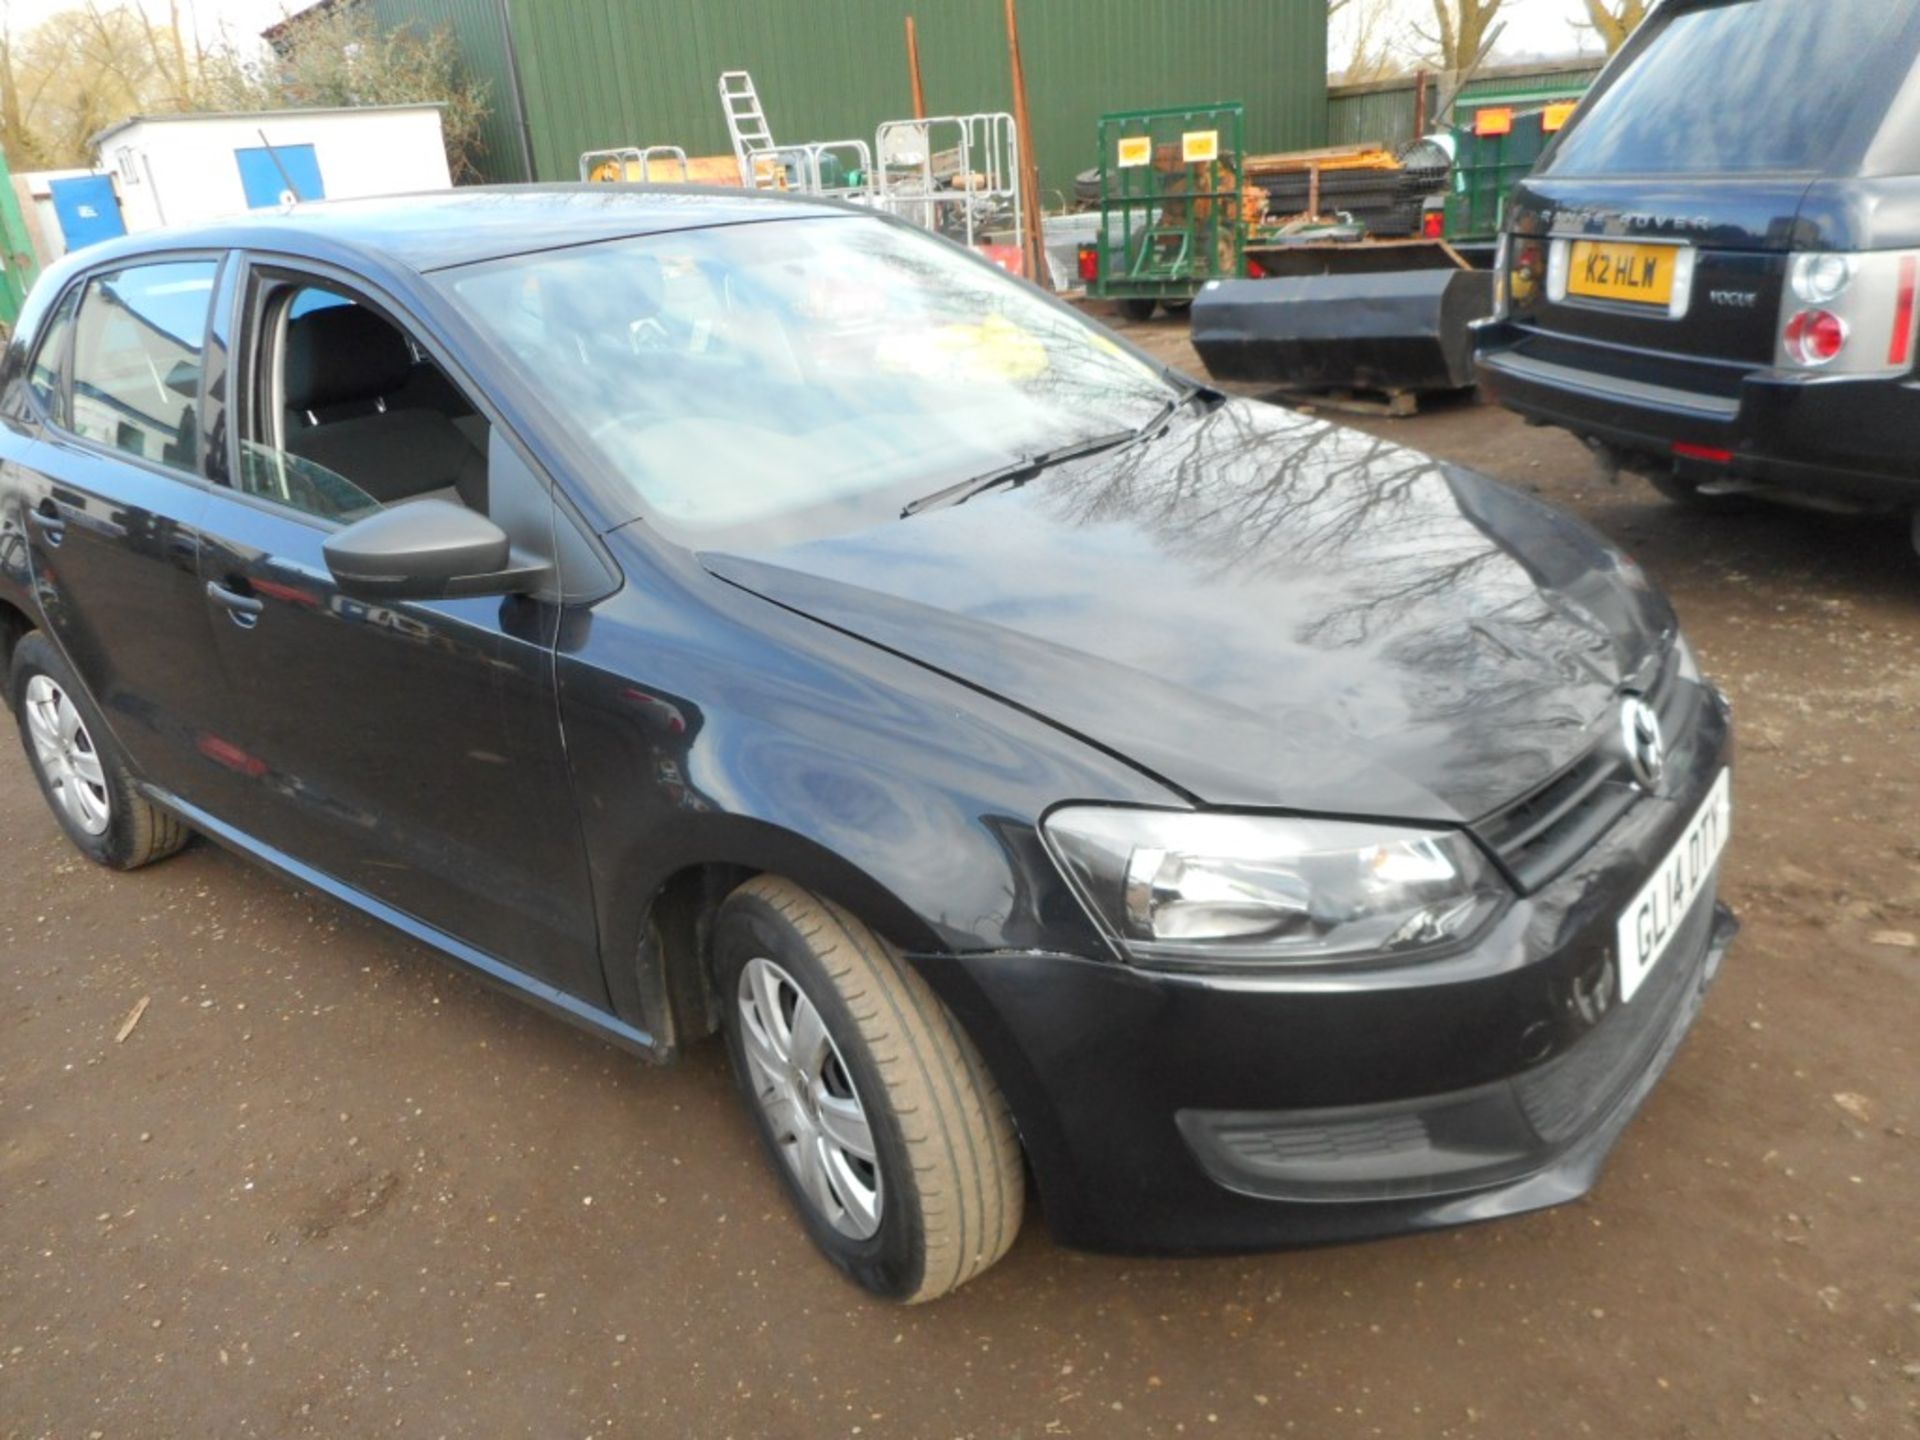 Volkswagen Polo S60 - Image 15 of 16